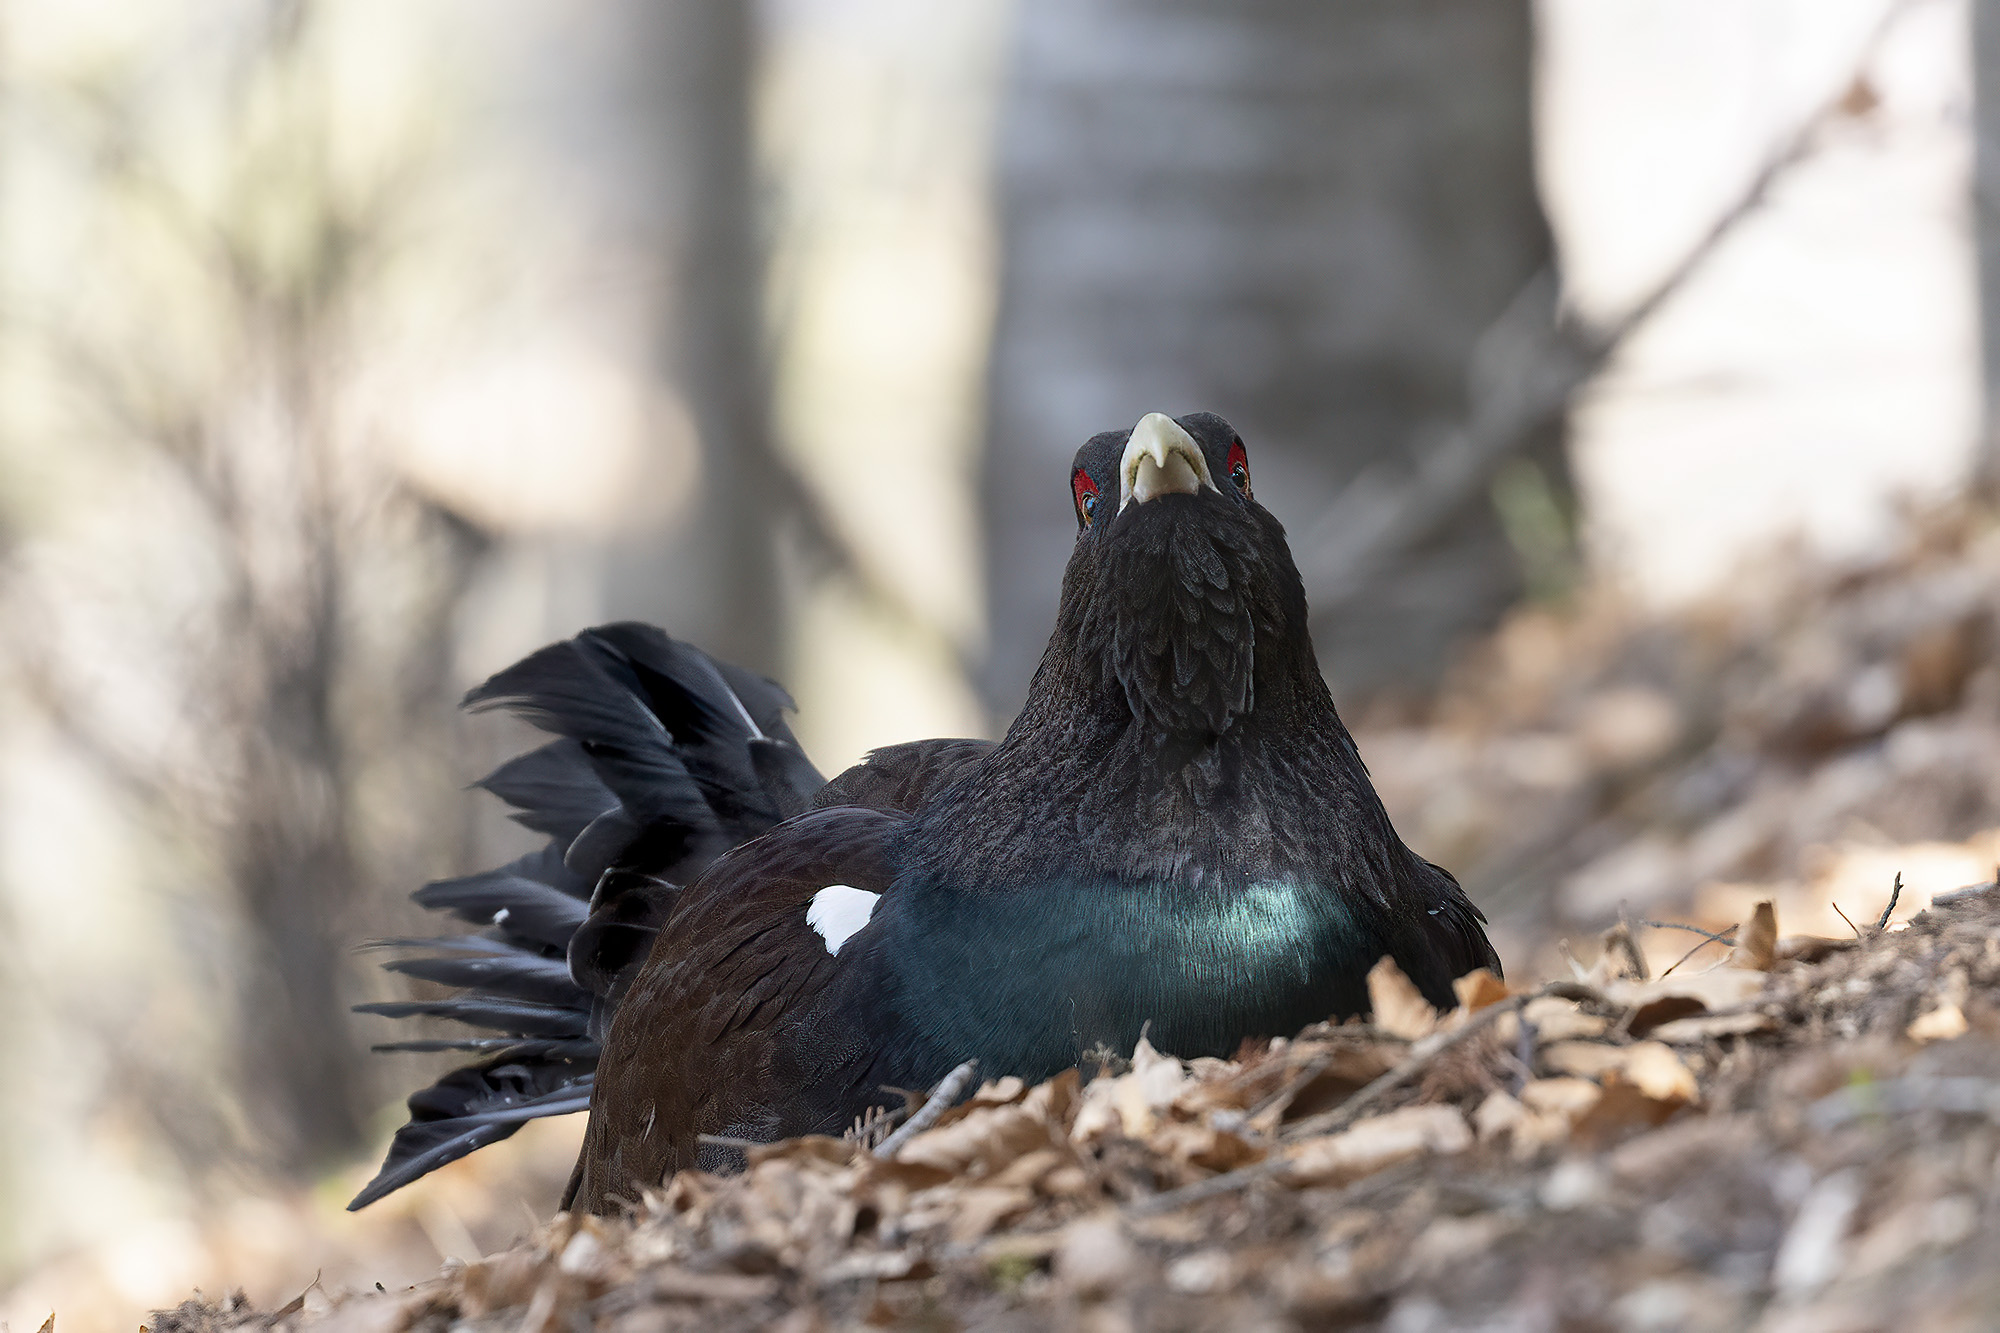 the rest of the capercaillie...